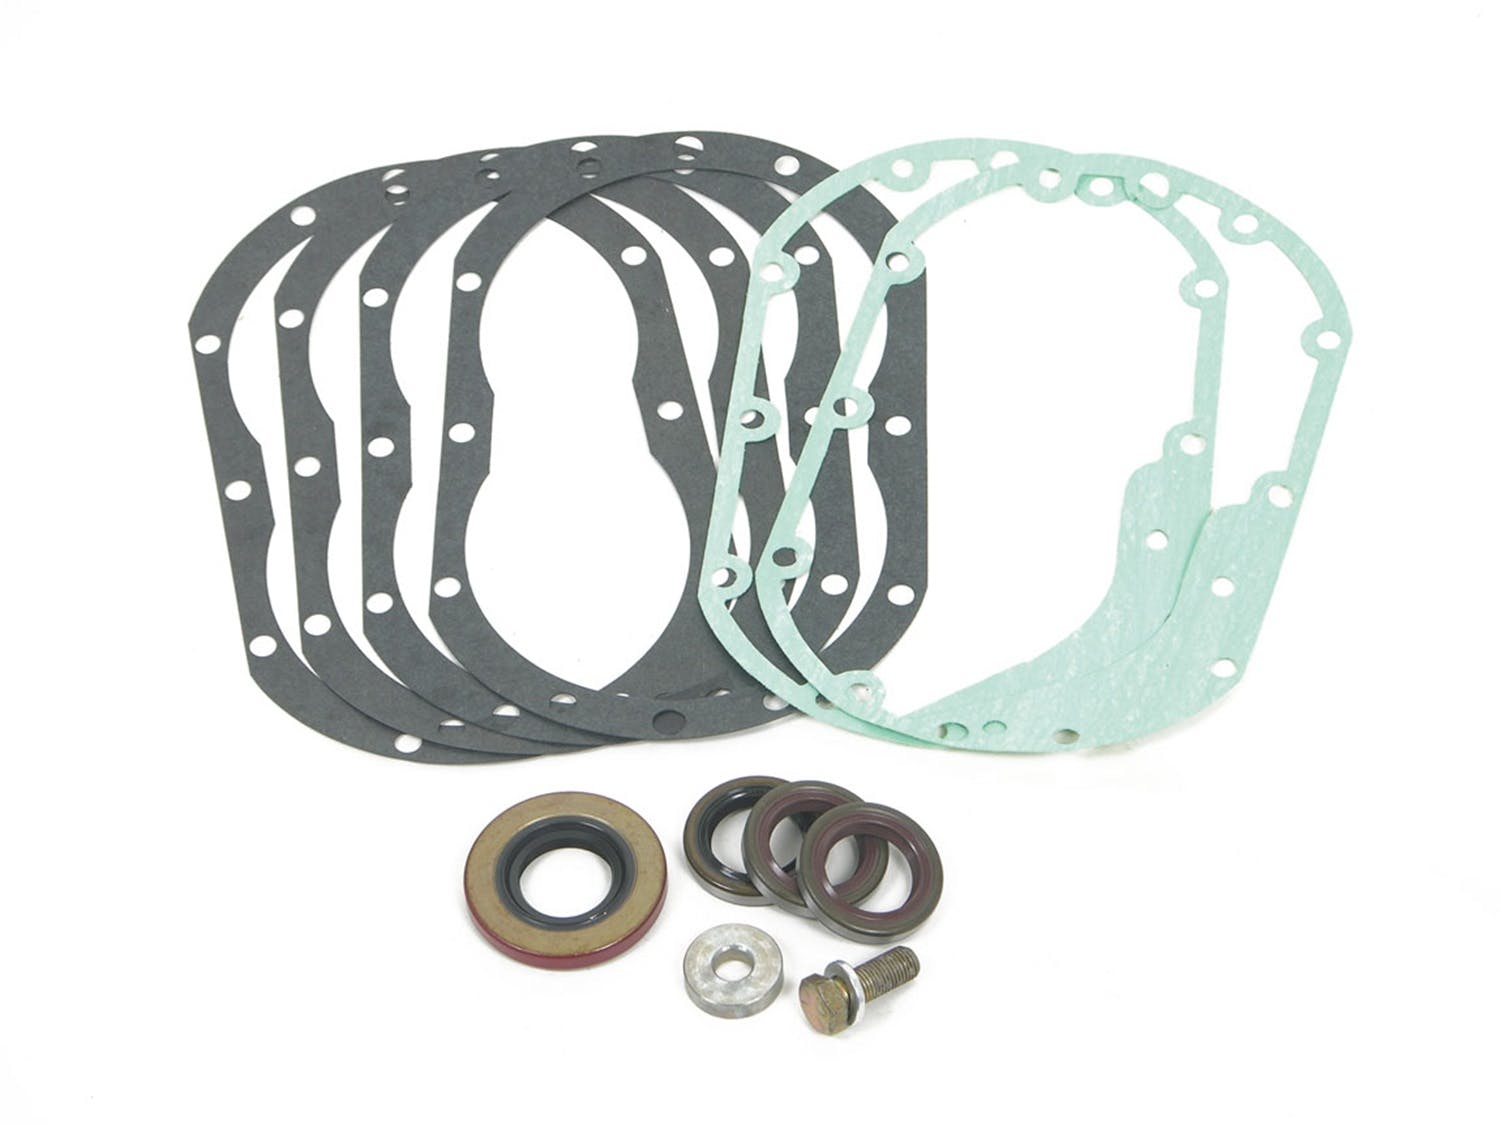 Weiand 9588 KIT - SEAL and GASKET L-76 2LOBE